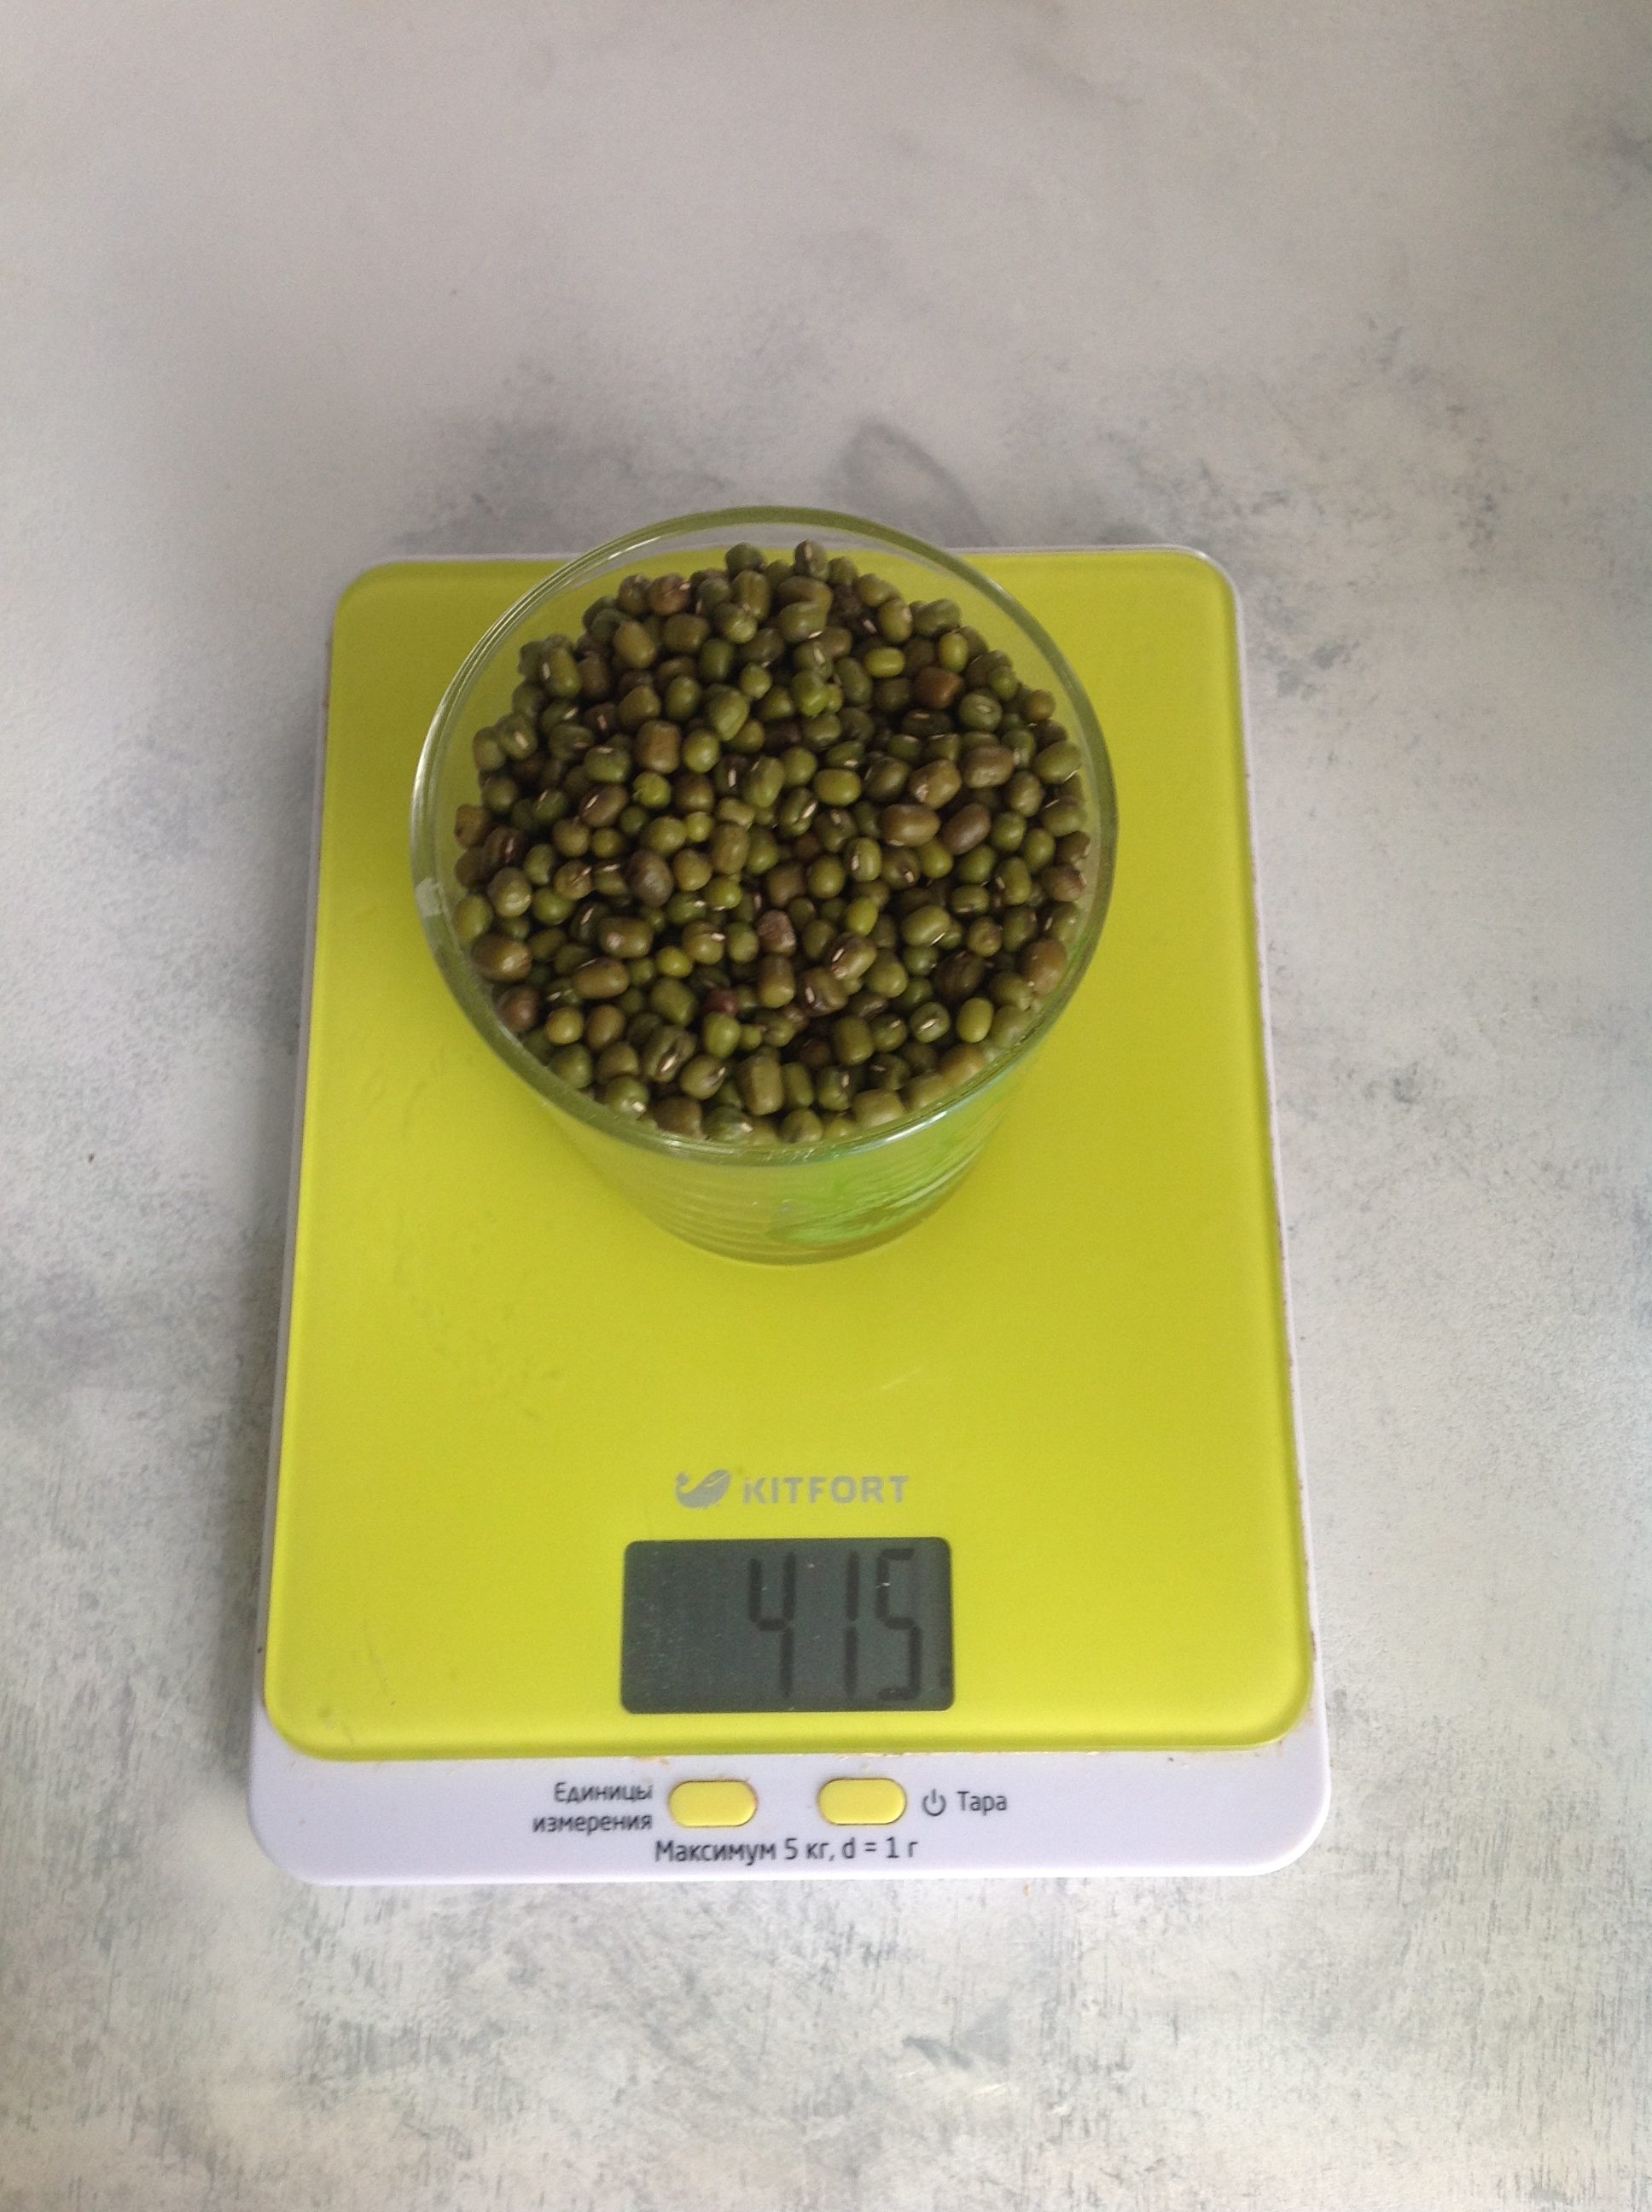 How much does mung bean dry weigh in a glass of 250 ml?